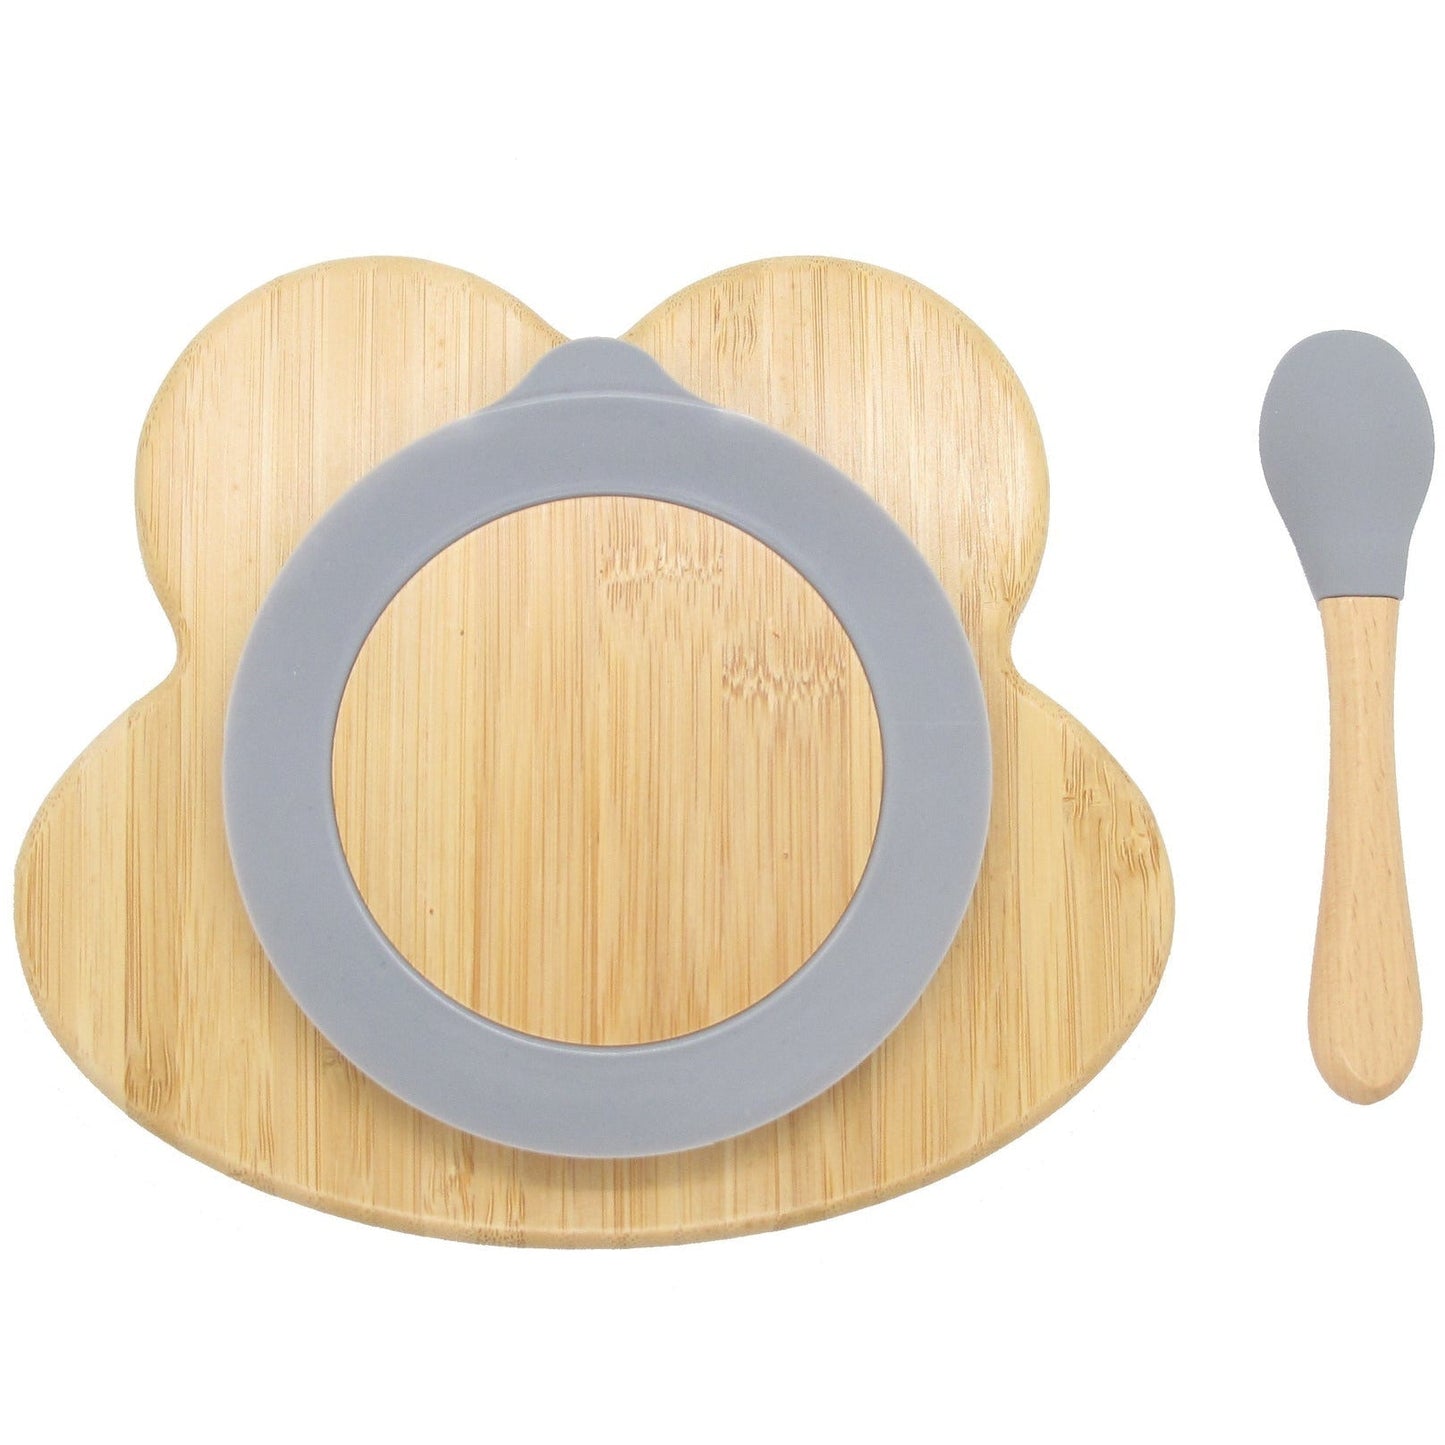 Bamboo Frog Kids Plate with Suction Cap Base & Spoon - Little Kids Business